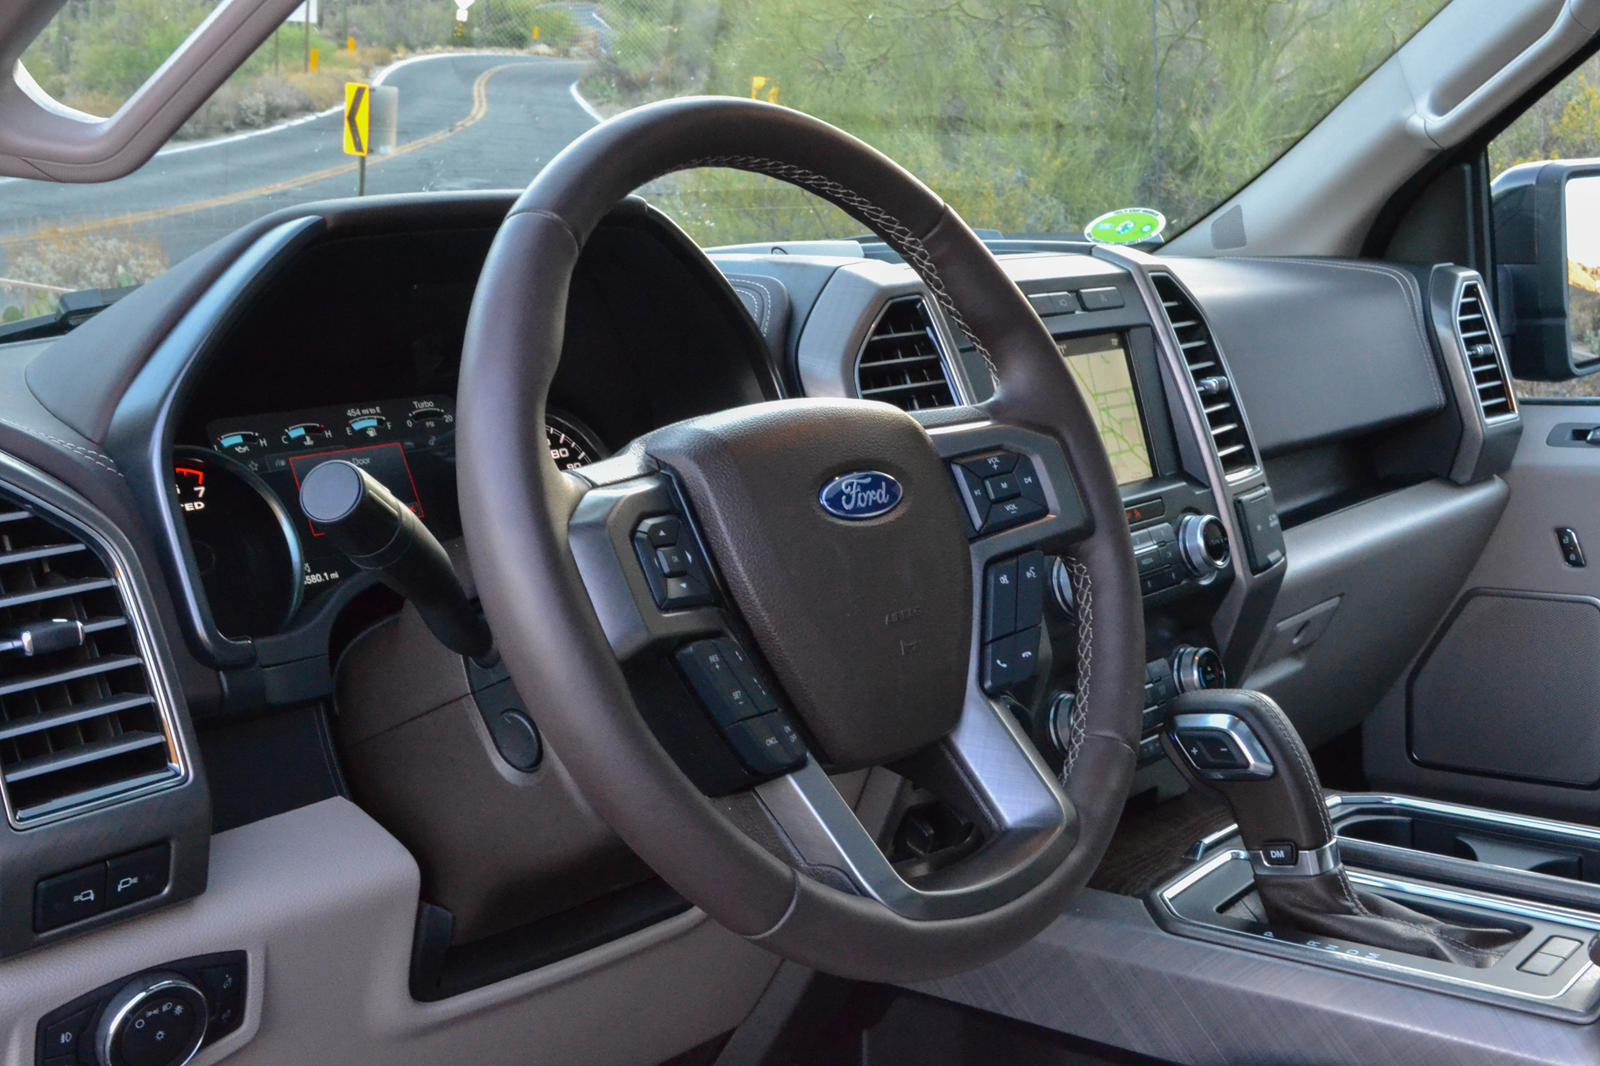 Review: The 2019 Ford F-150 Limited offers impressive capability and luxury